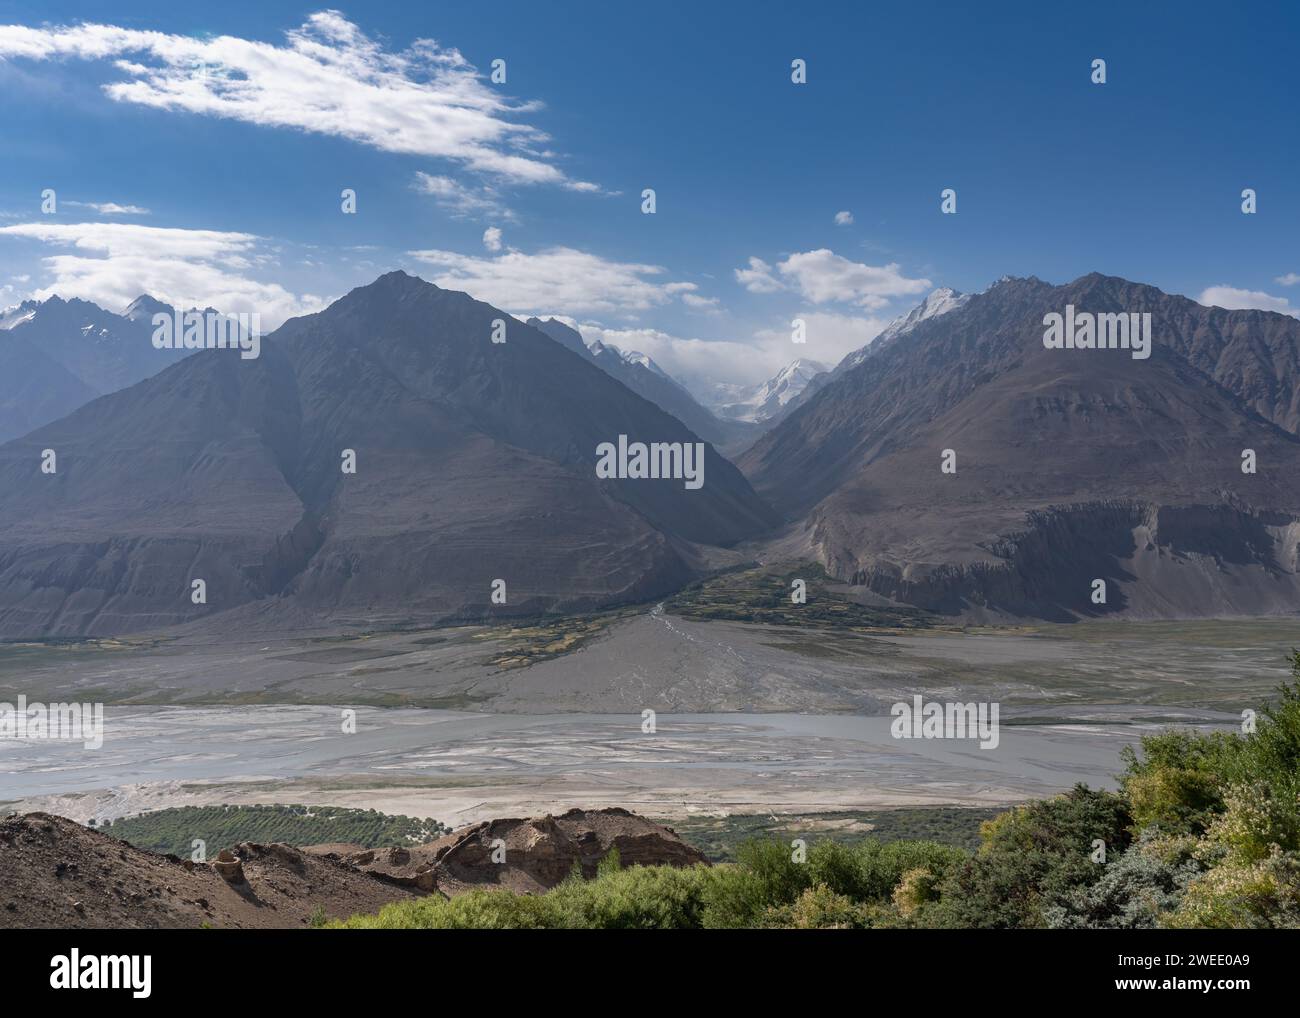 Landscape view from Yamchun fortress on Panj river valley in Wakhan corridor with Afghanistan mountains in background, Gorno-Badakshan, Tajikistan Stock Photo